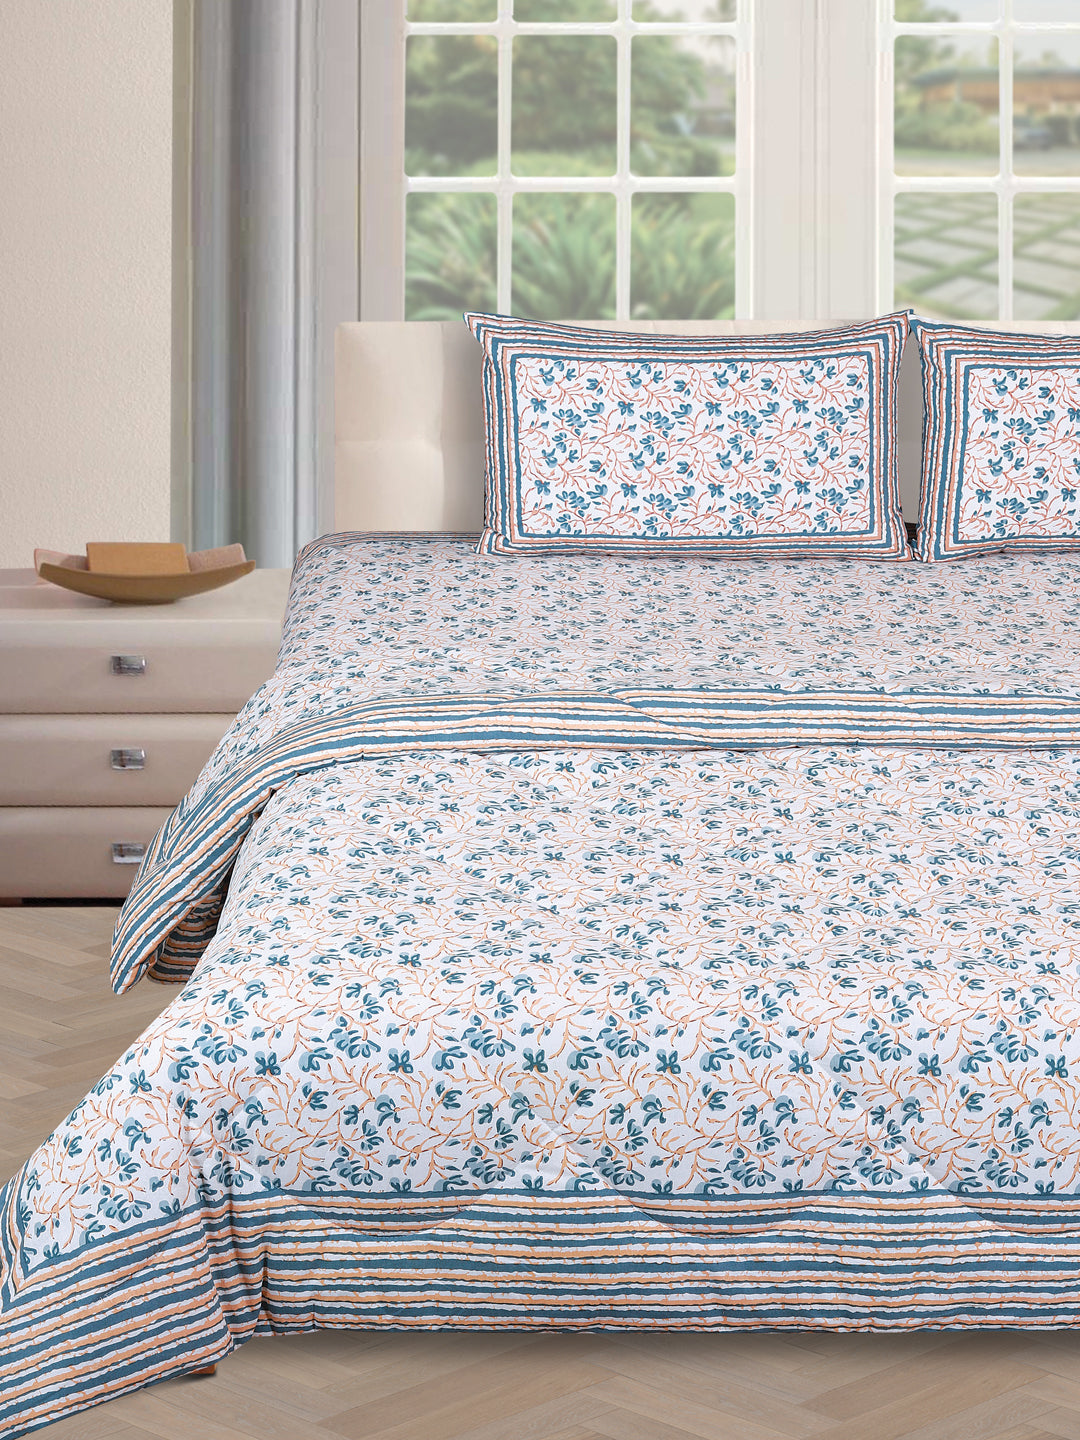 Jaipuri Bedding Set Reversible AC Comforter with Bedsheet and 2 Pillow Covers, Blue & White